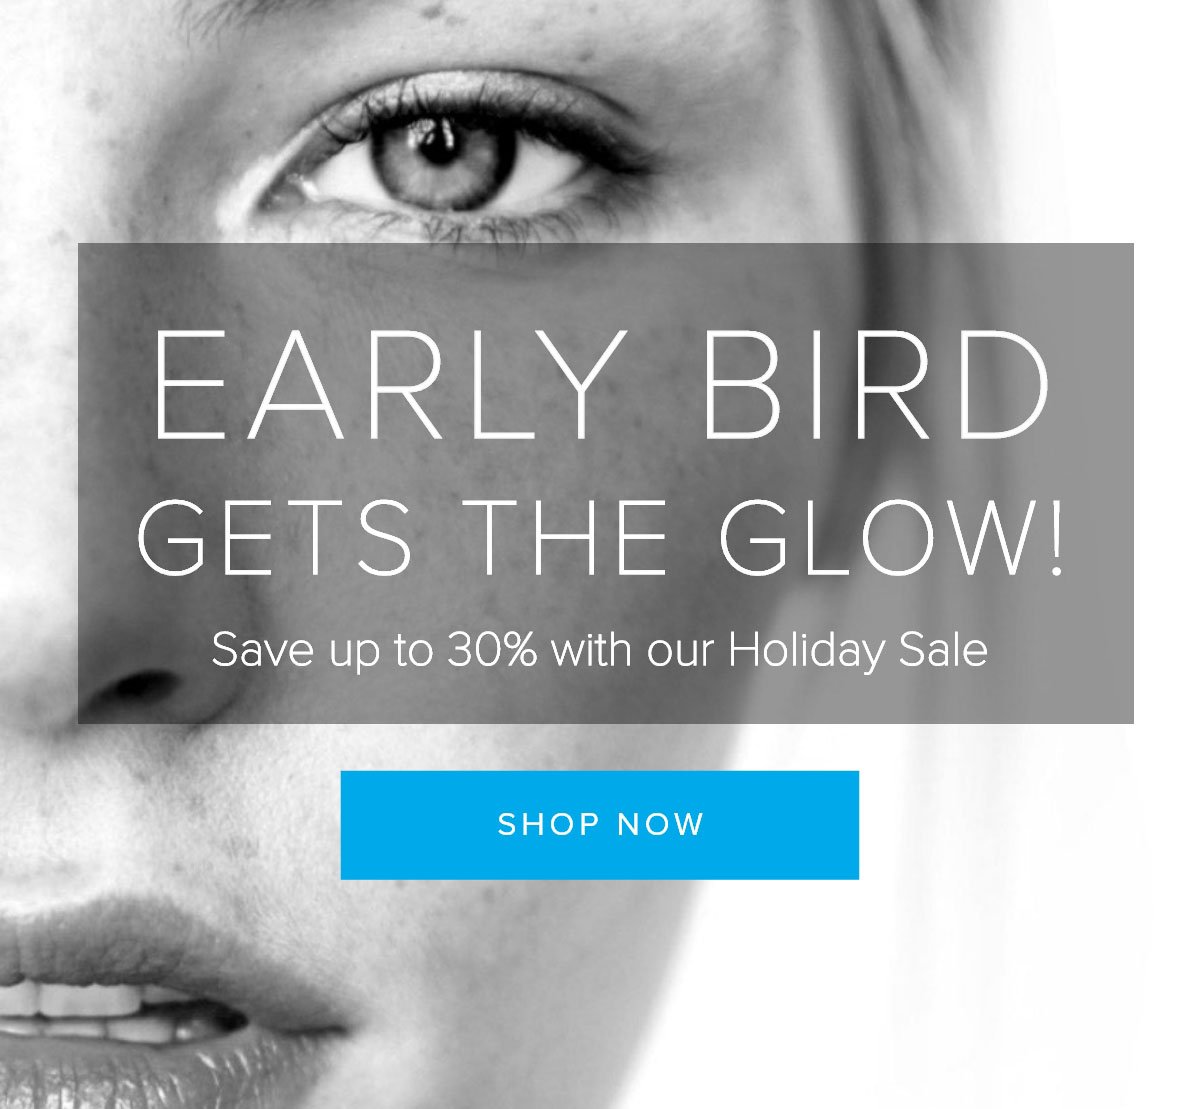 Early Bird Gets the Glow! [SHOP NOW]